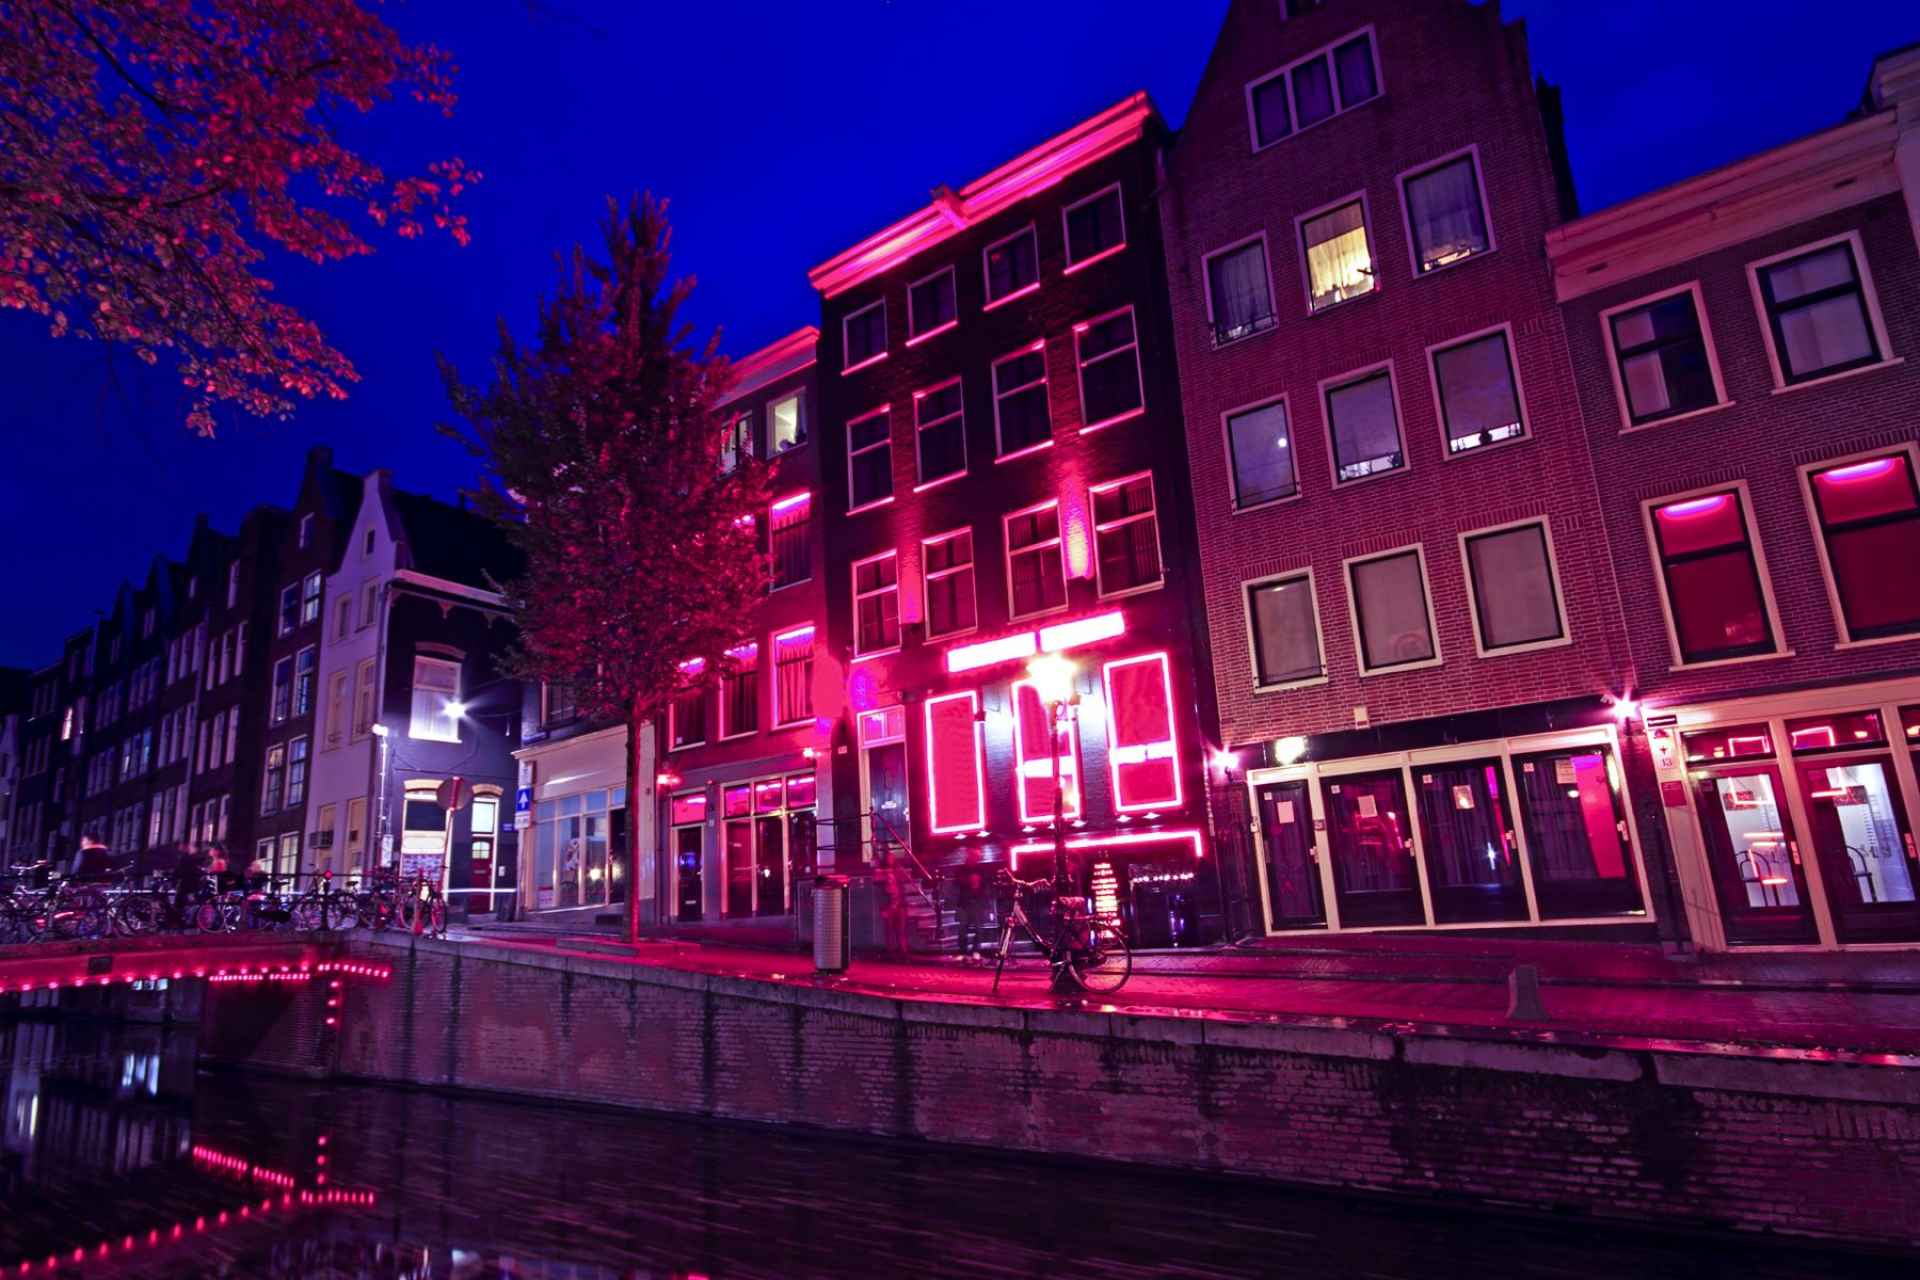 Red Light Districts Around the World